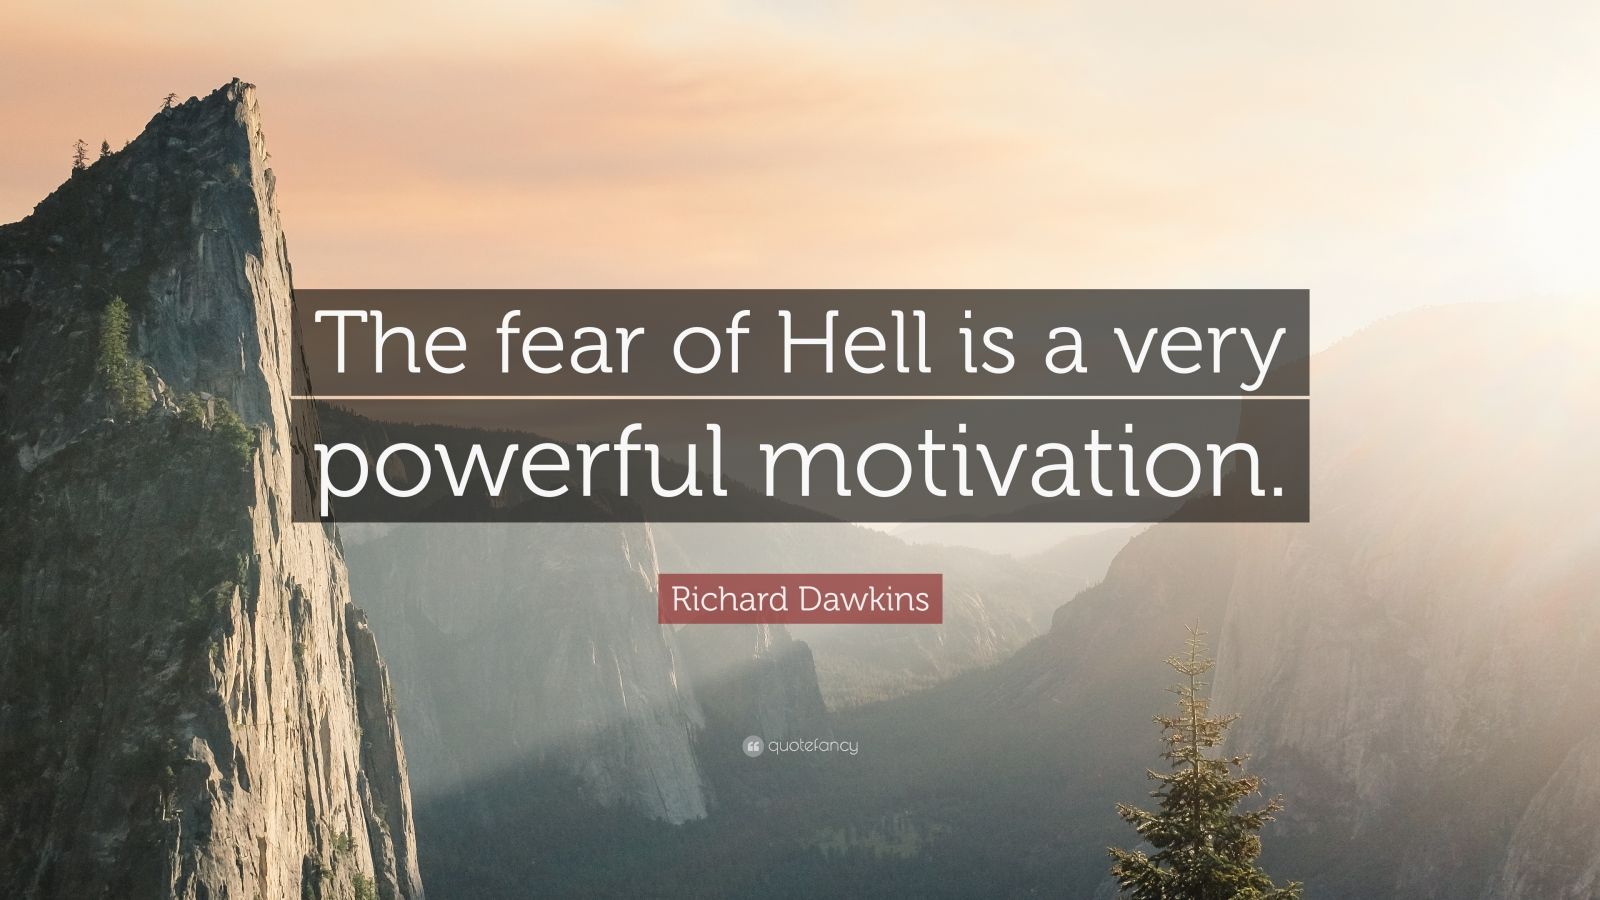 Richard Dawkins Quote: “The fear of Hell is a very powerful motivation